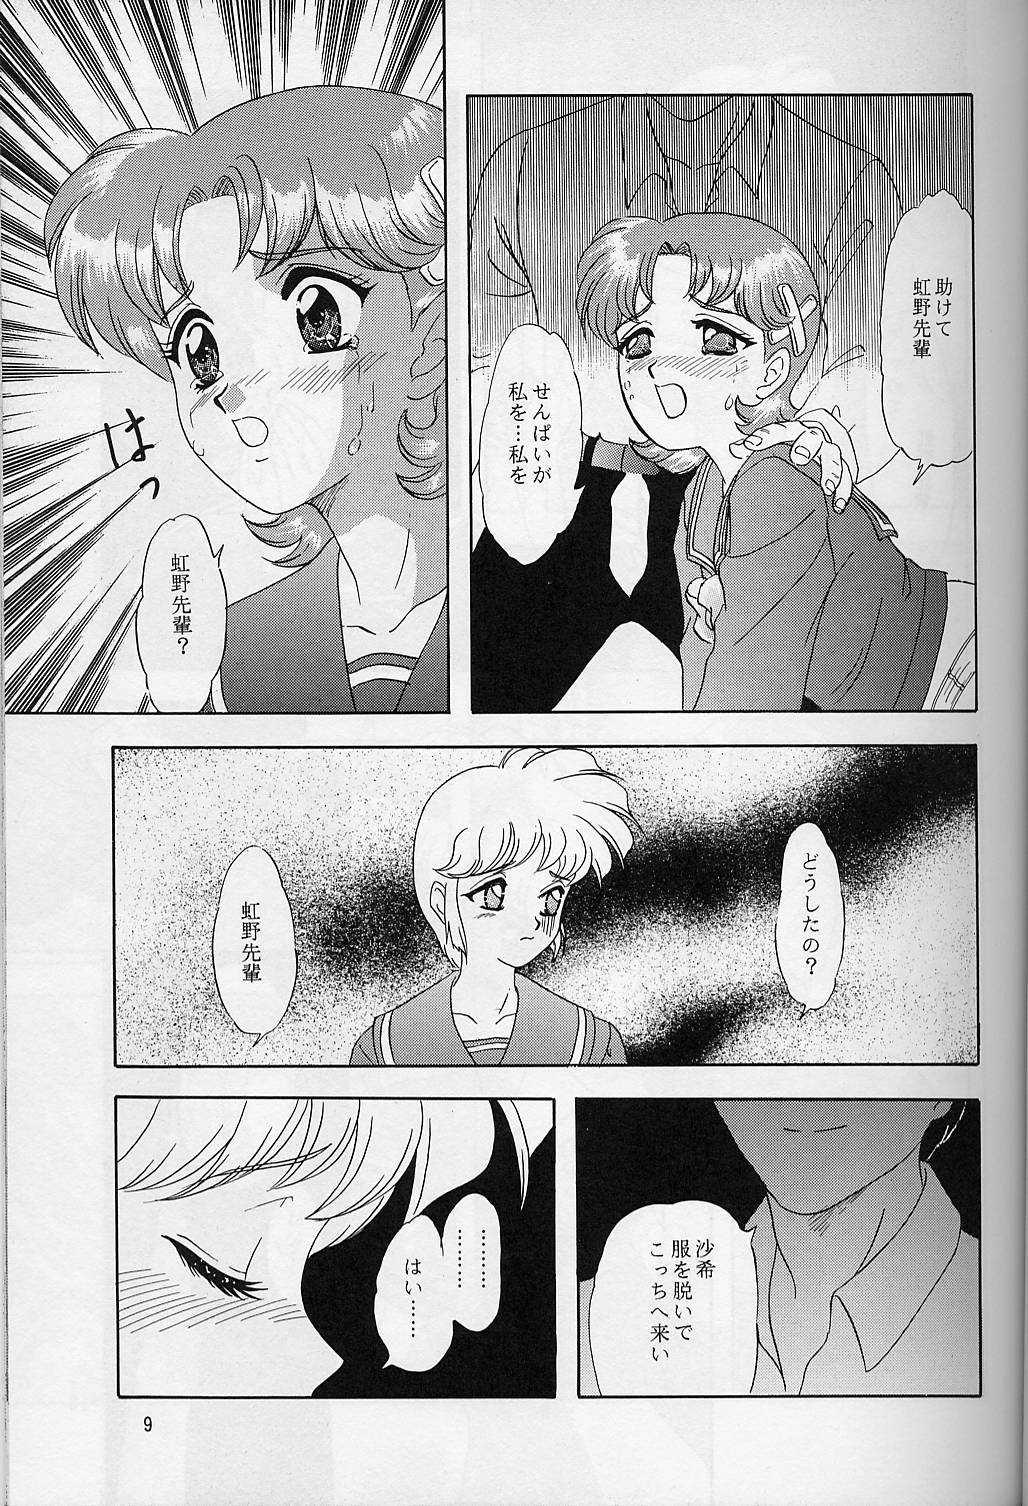 Lesbos Lunch Box 30 - Lunch Time 10 - Tokimeki memorial Wet Cunts - Page 8